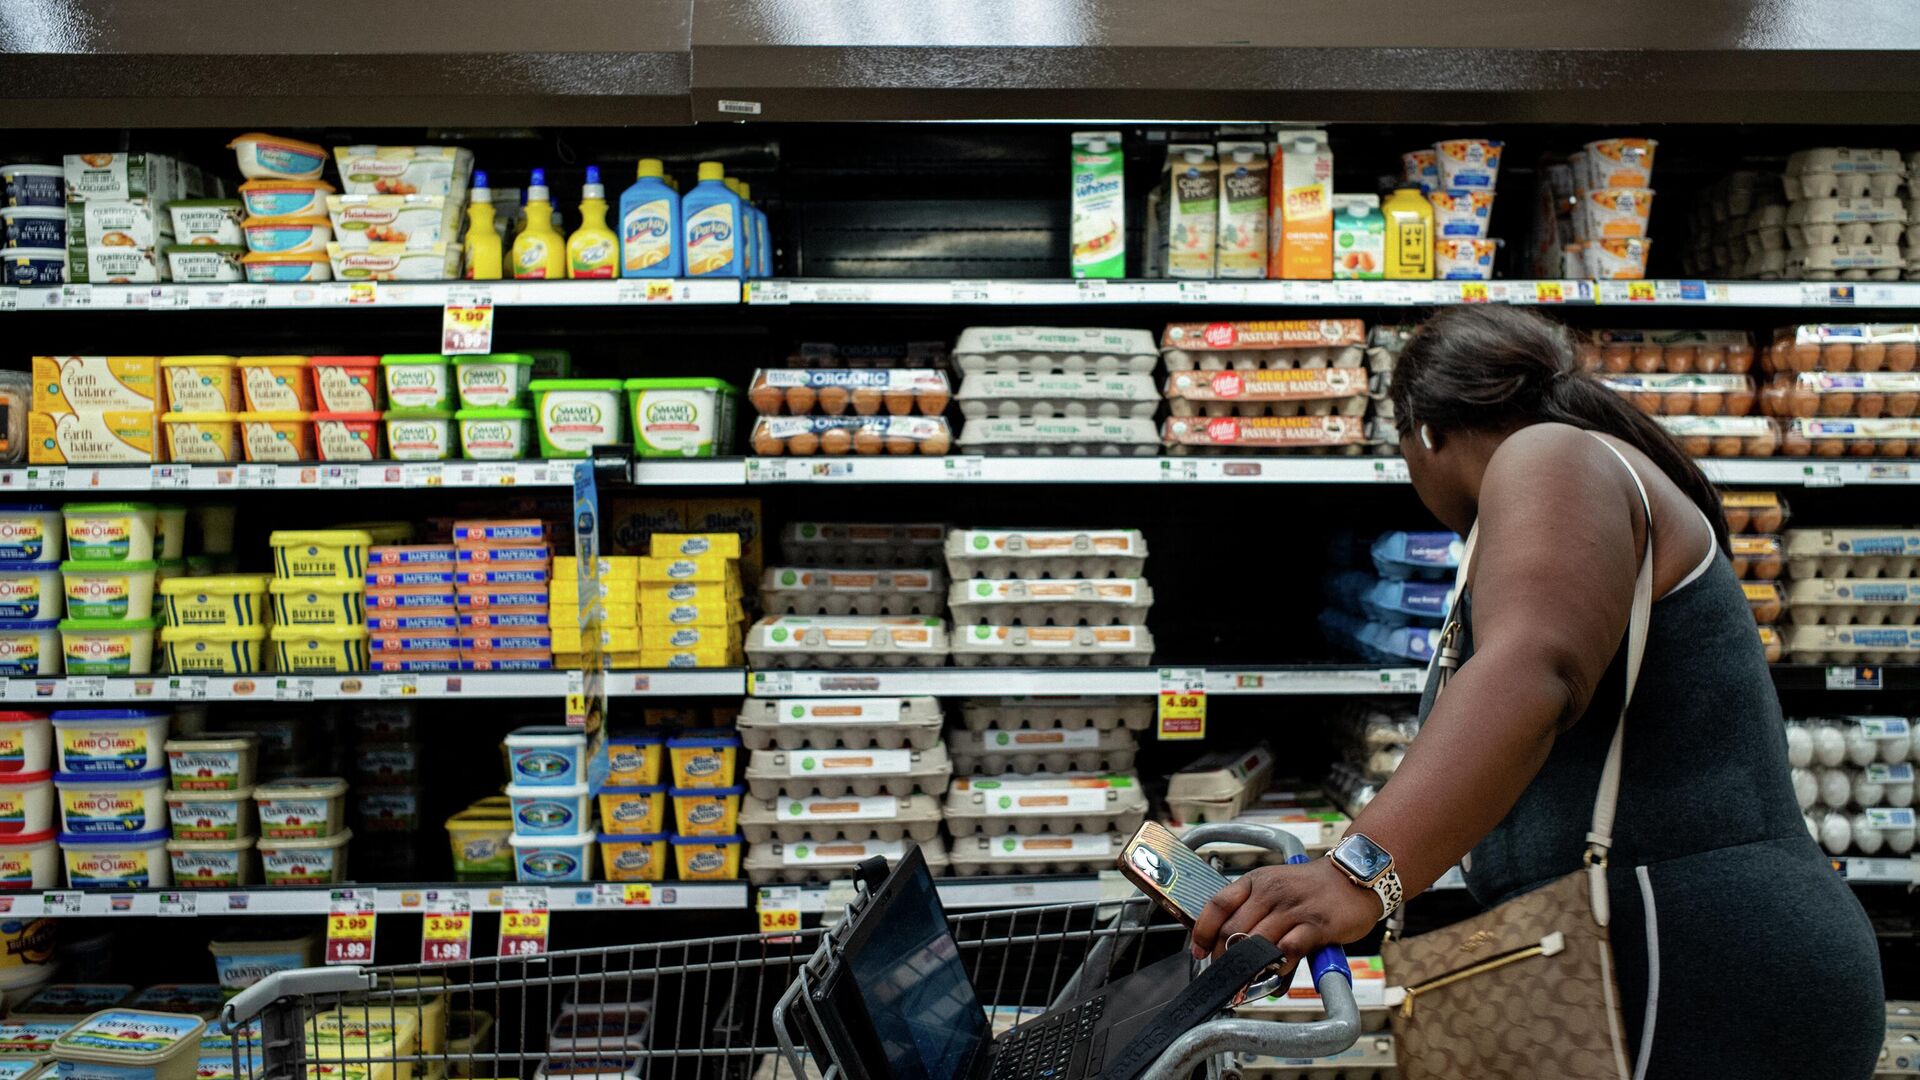 HOUSTON, TEXAS - AUGUST 15: A customer shops for eggs in a Kroger grocery store on August 15, 2022 in Houston, Texas. Egg prices steadily climb in the U.S. as inflation continues impacting grocery stores nationwide.  - Sputnik International, 1920, 13.09.2022